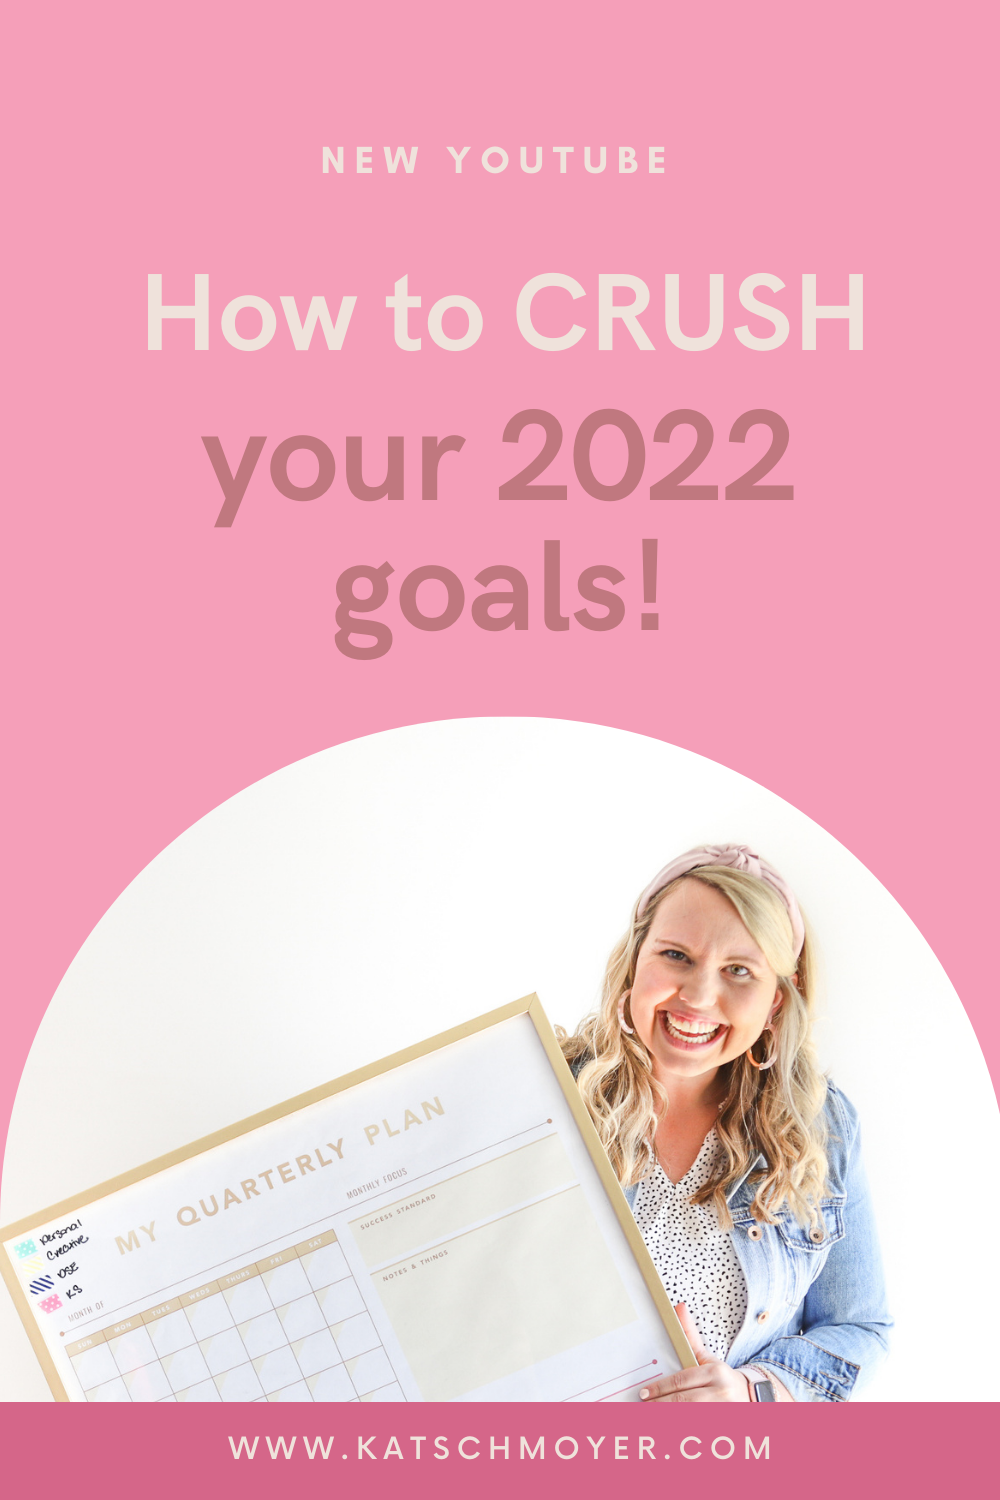 How to CRUSH your 2022 Goals